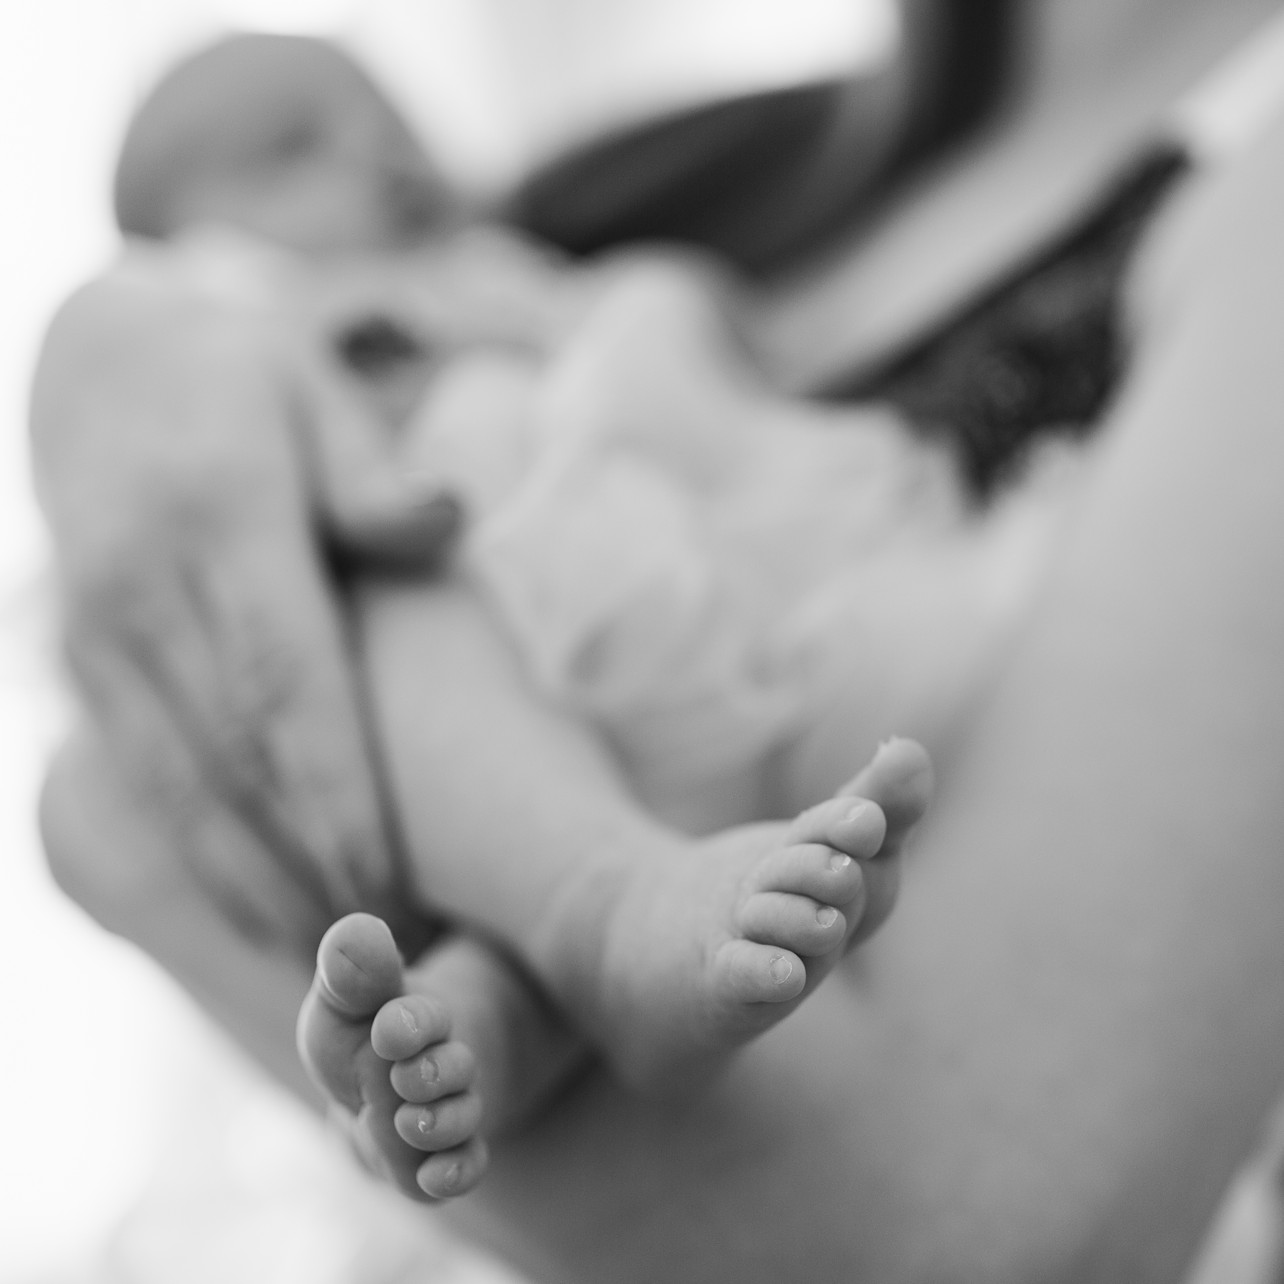 Tung Chung Newborn Session - in black and white - focused on the baby toes